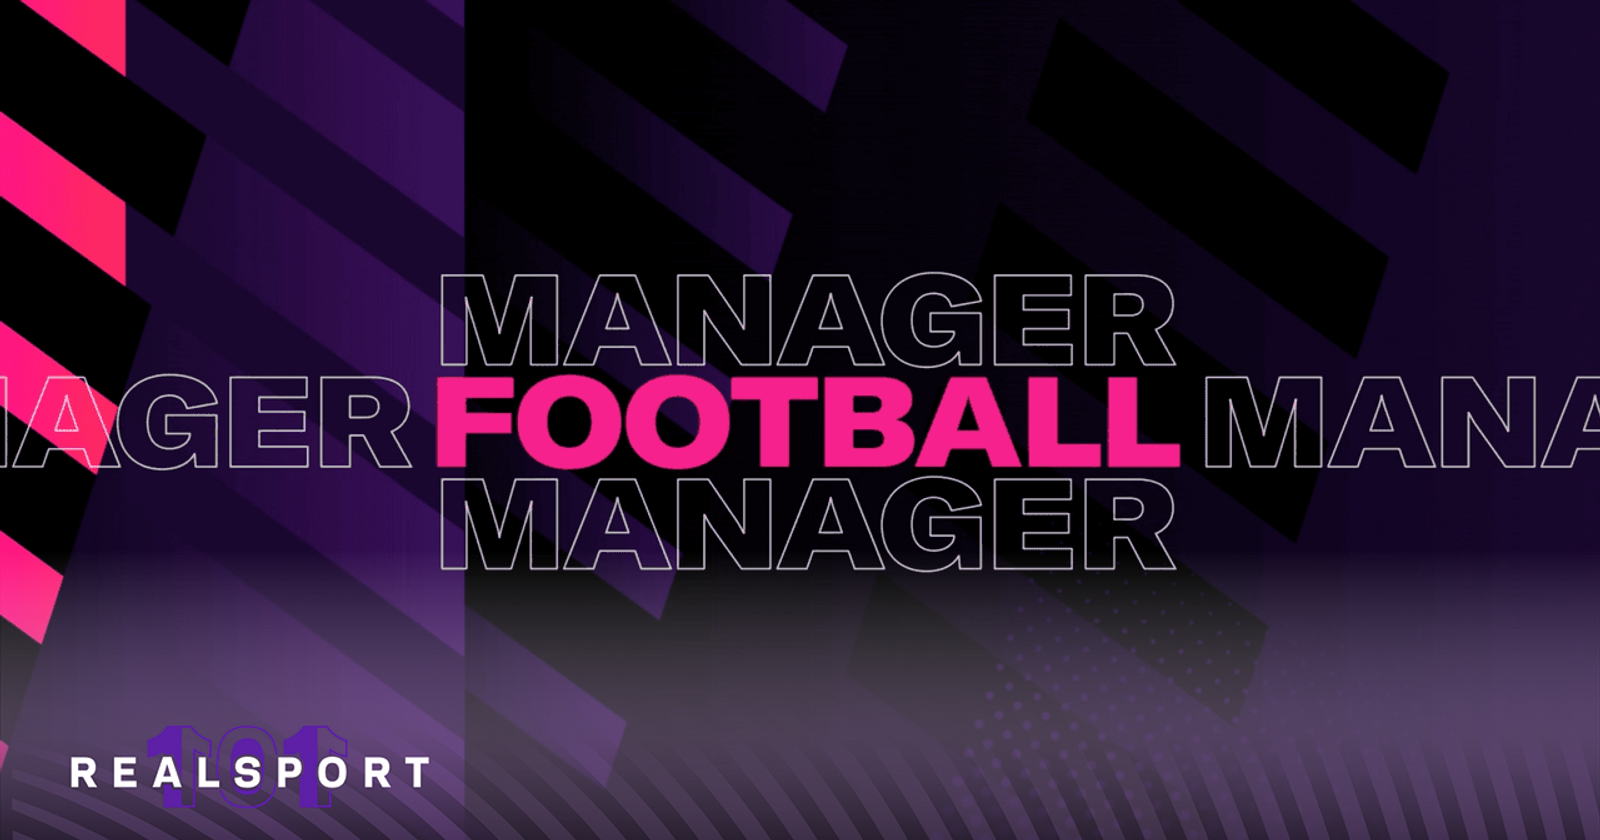 How to Download the Football Manager 2022 Editor - FAQ